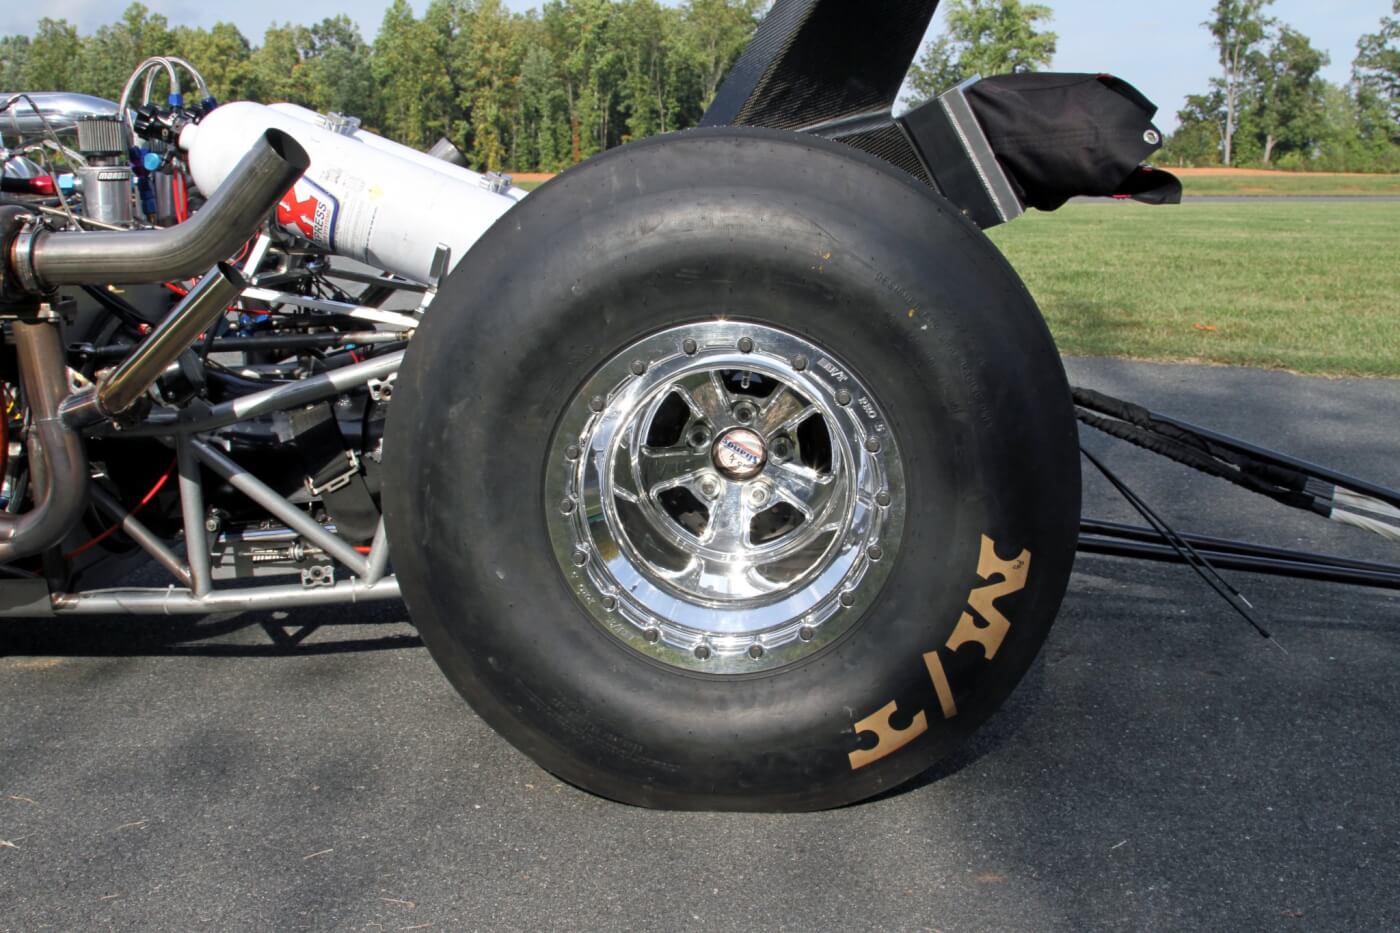 Massive 35.0/15.0-16 Mickey Thompson ET Drag slicks are securely held in place on the double beadlock Mickey Thompson Pro 5 wheels. You can also see the ends of the Strange Engineering axle shafts that deliver the power to the wheels.